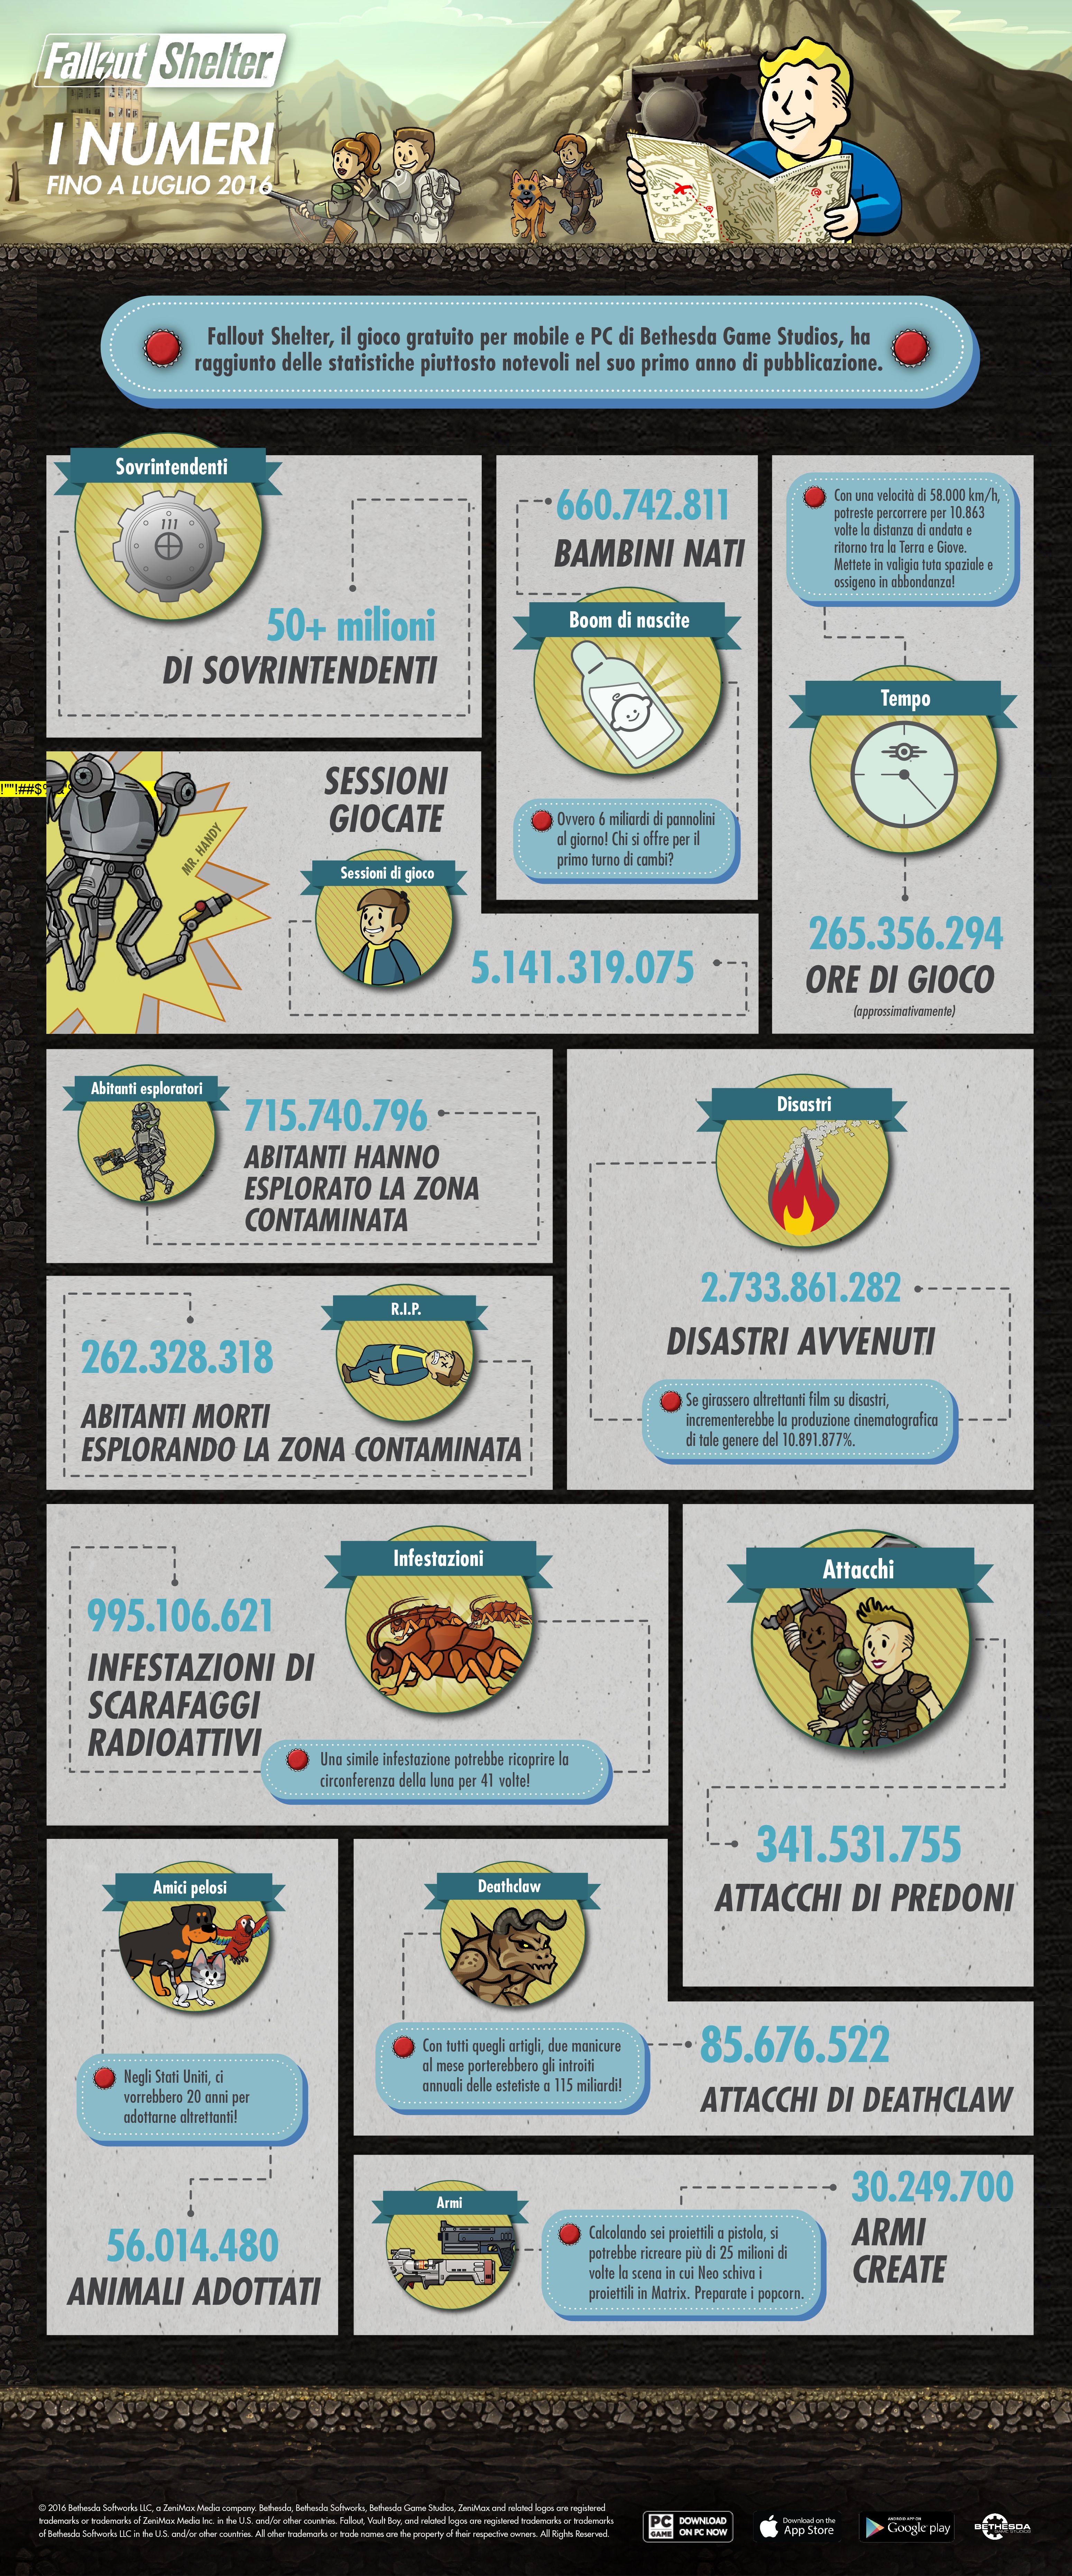 FalloutShelter_Infographic_071316_IT